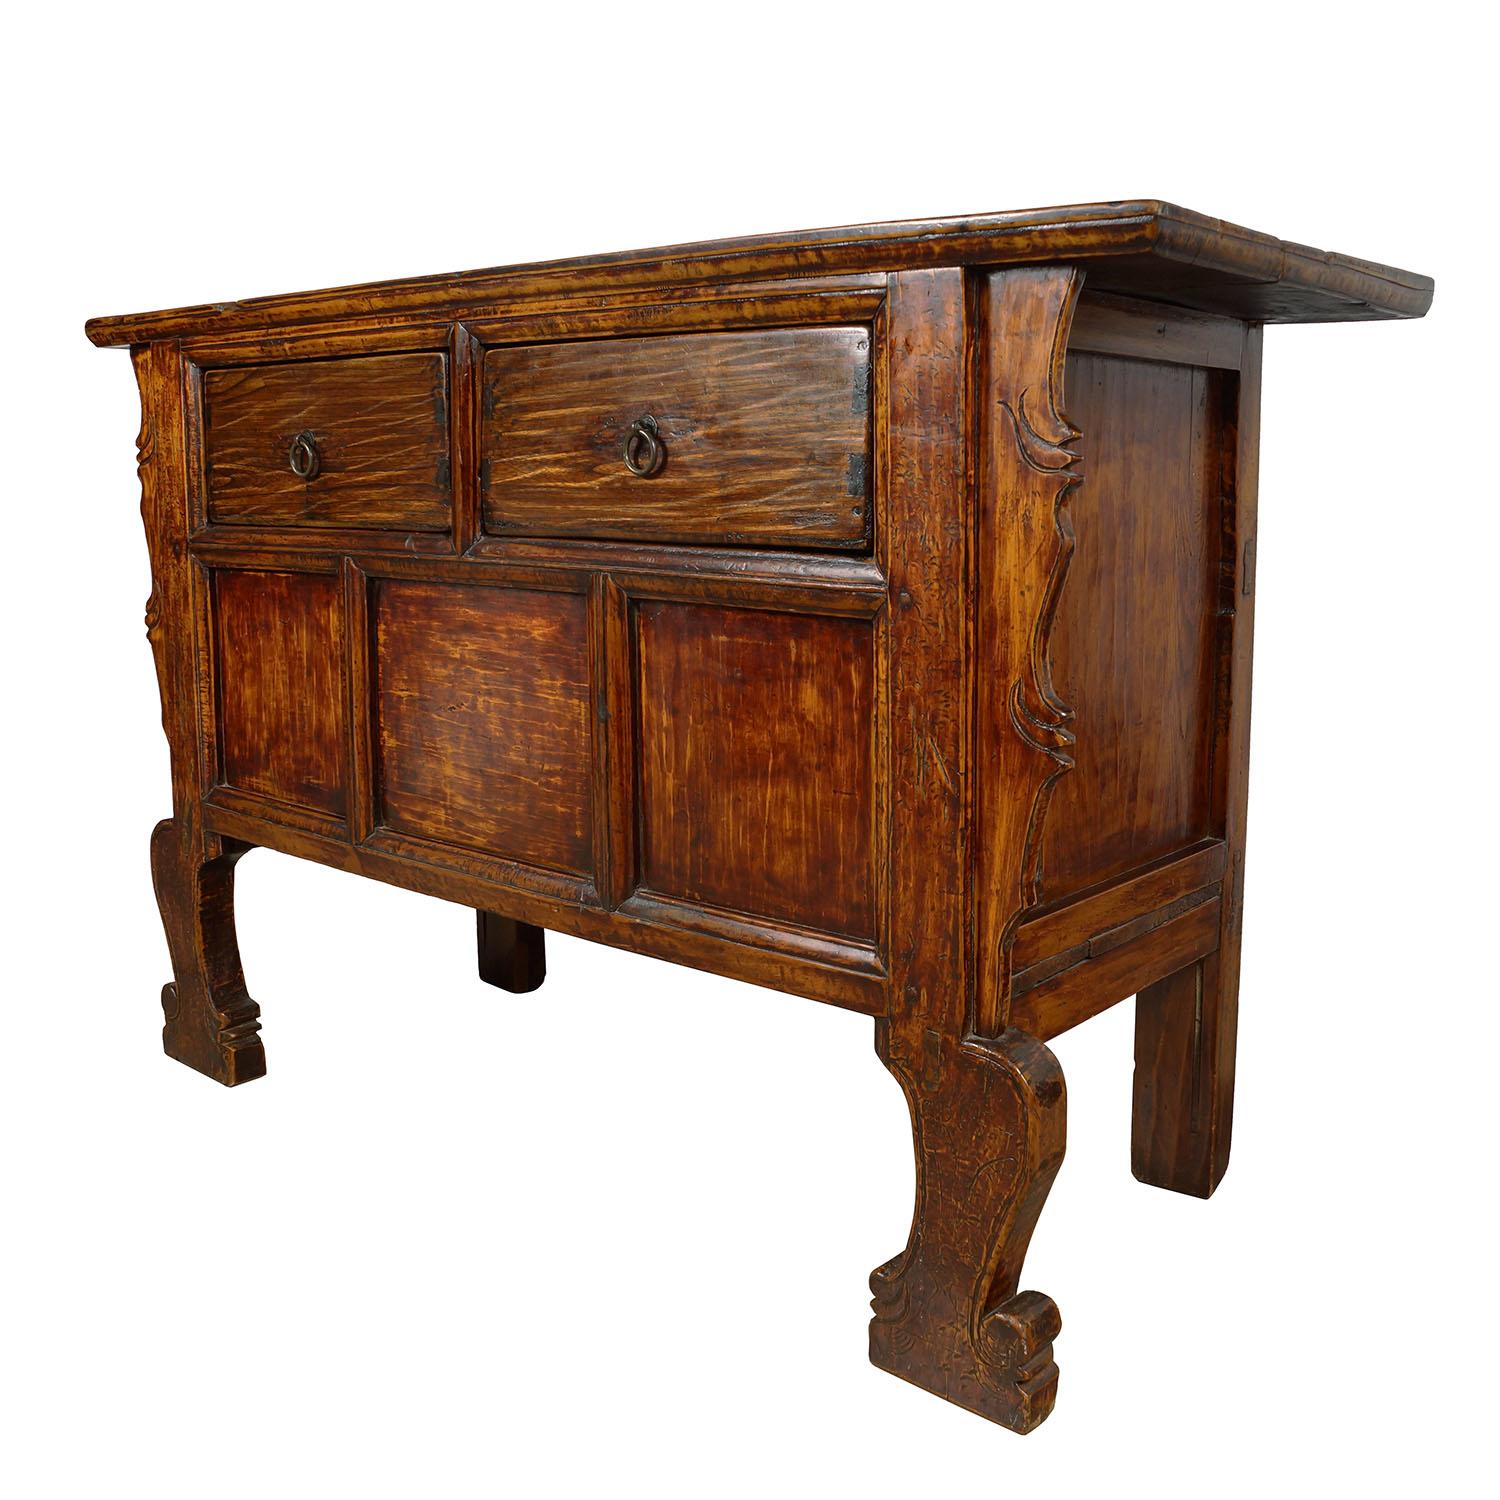 Size: 37in H x 57.5in W x 21in D
Drawer: 6.5in H x 16.5in W x 16in D
Origin: China
Circa: 1850 - 1900
Material: Elm wood
Condition: Original finished, solid wood construction, sturdy, very heavy, normal age wear.

This Chinese antique